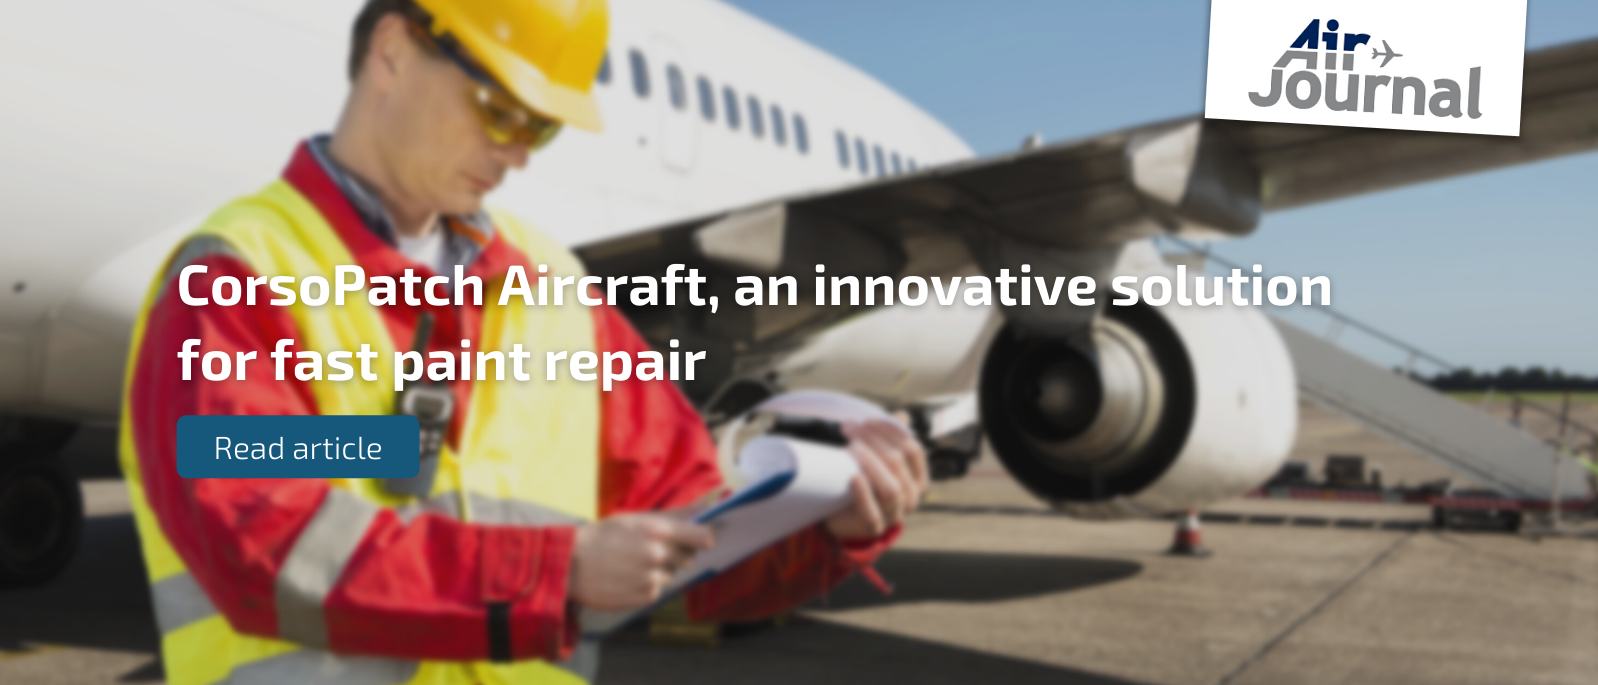 The journal AirJournal talks about our innovative solution for planes and aircraft EASA and Part 21 G